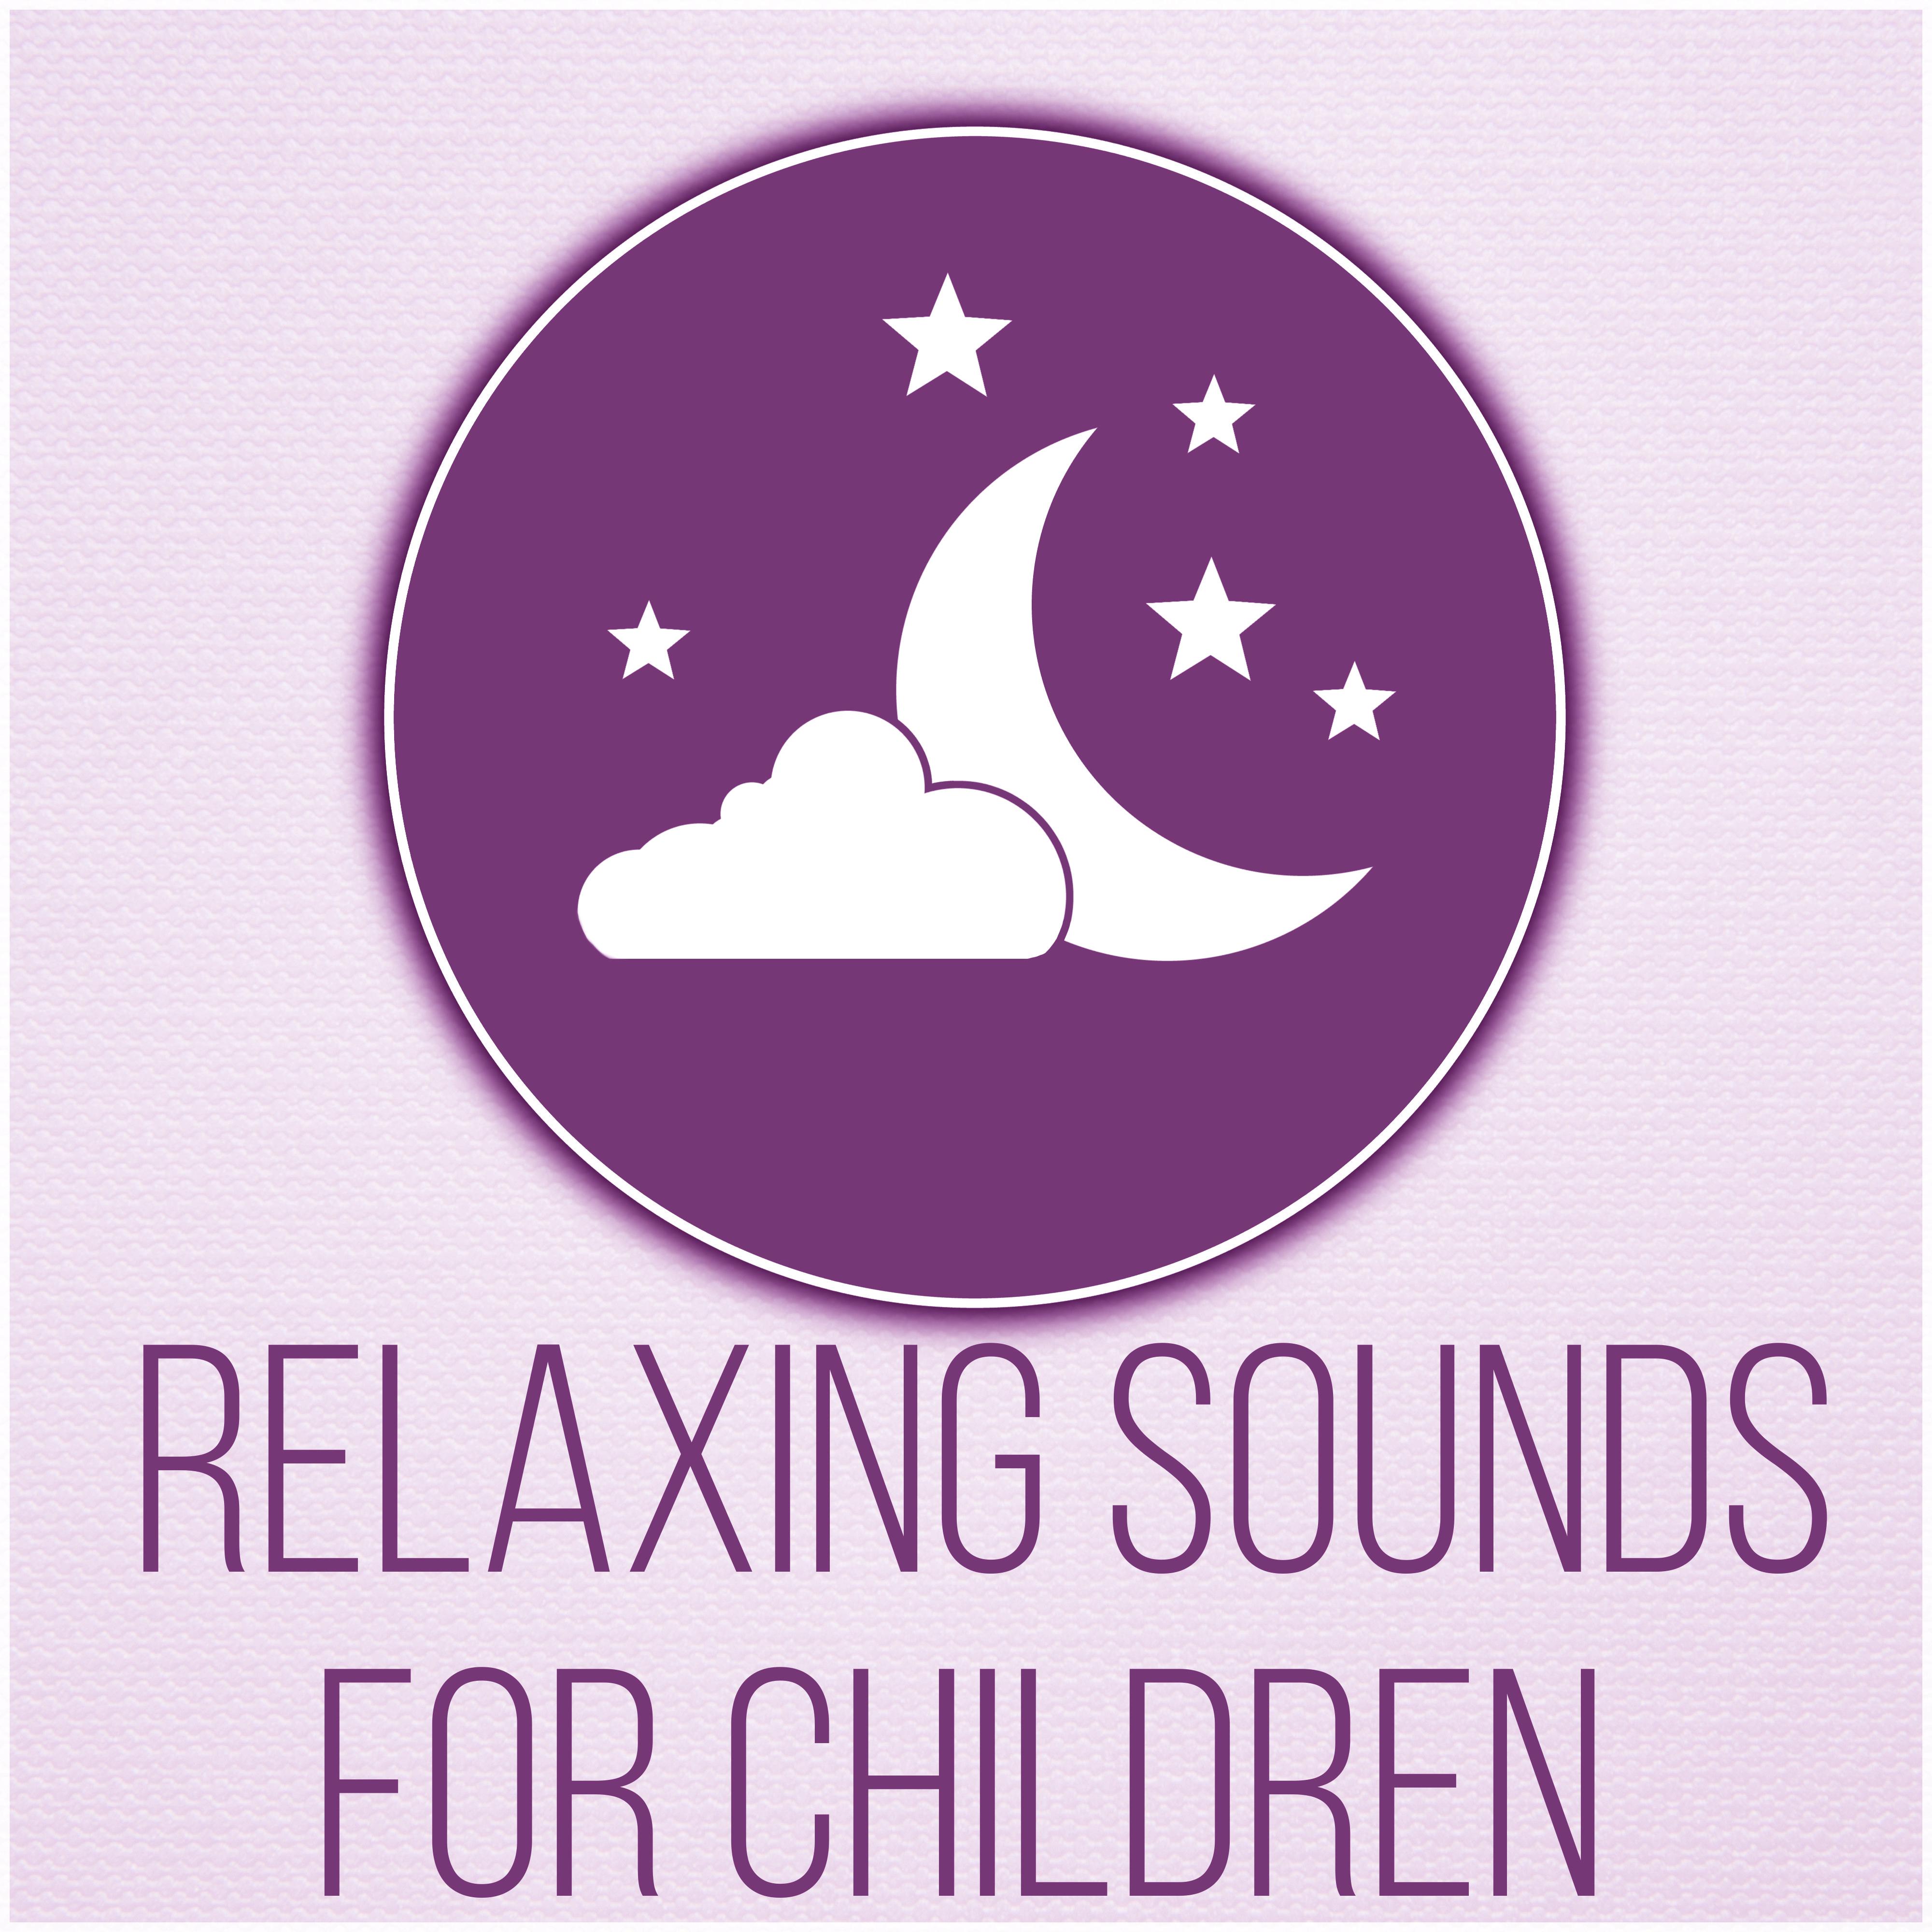 Relaxing Sounds for Children - Natural White Noise, Babies, Help Your Baby Sleep Through the Night, Soothing Sounds for Newborn Babies